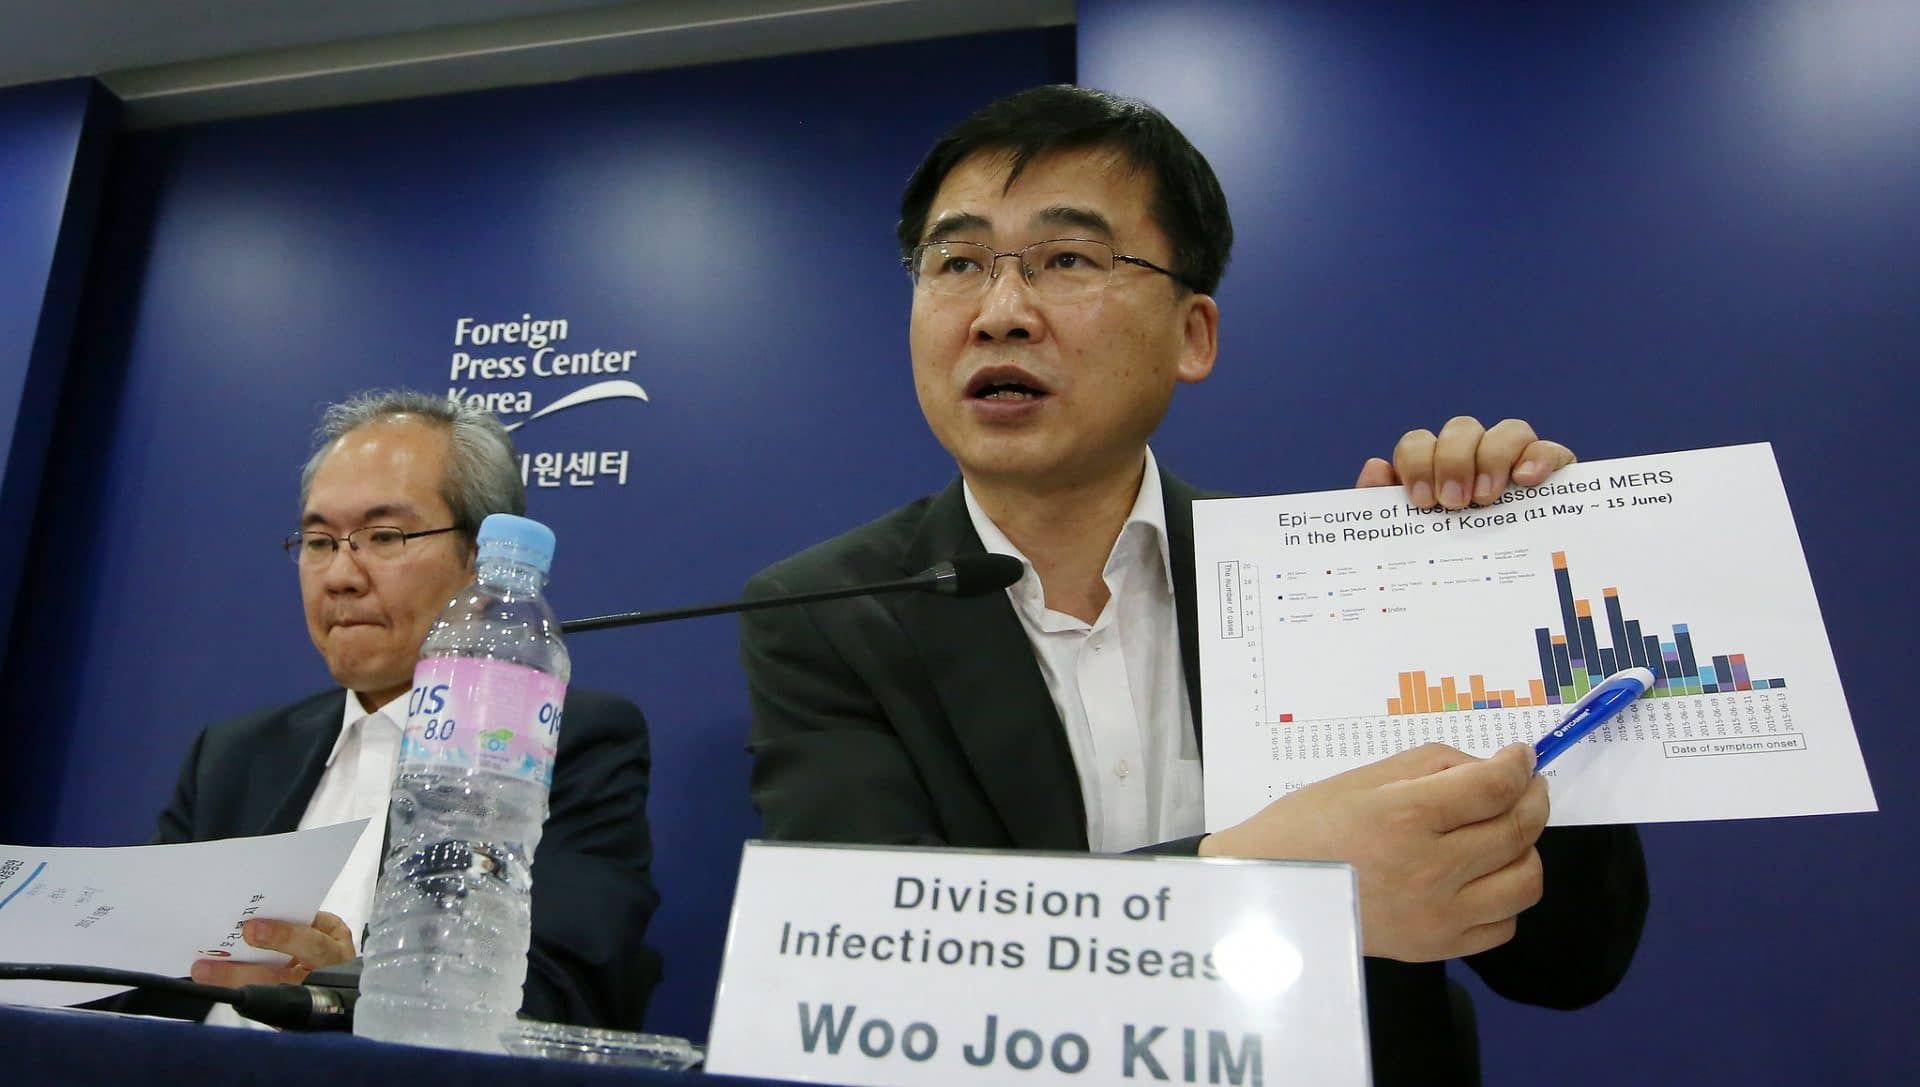 Korean health officials discuss the 2015 MERS outbreak.